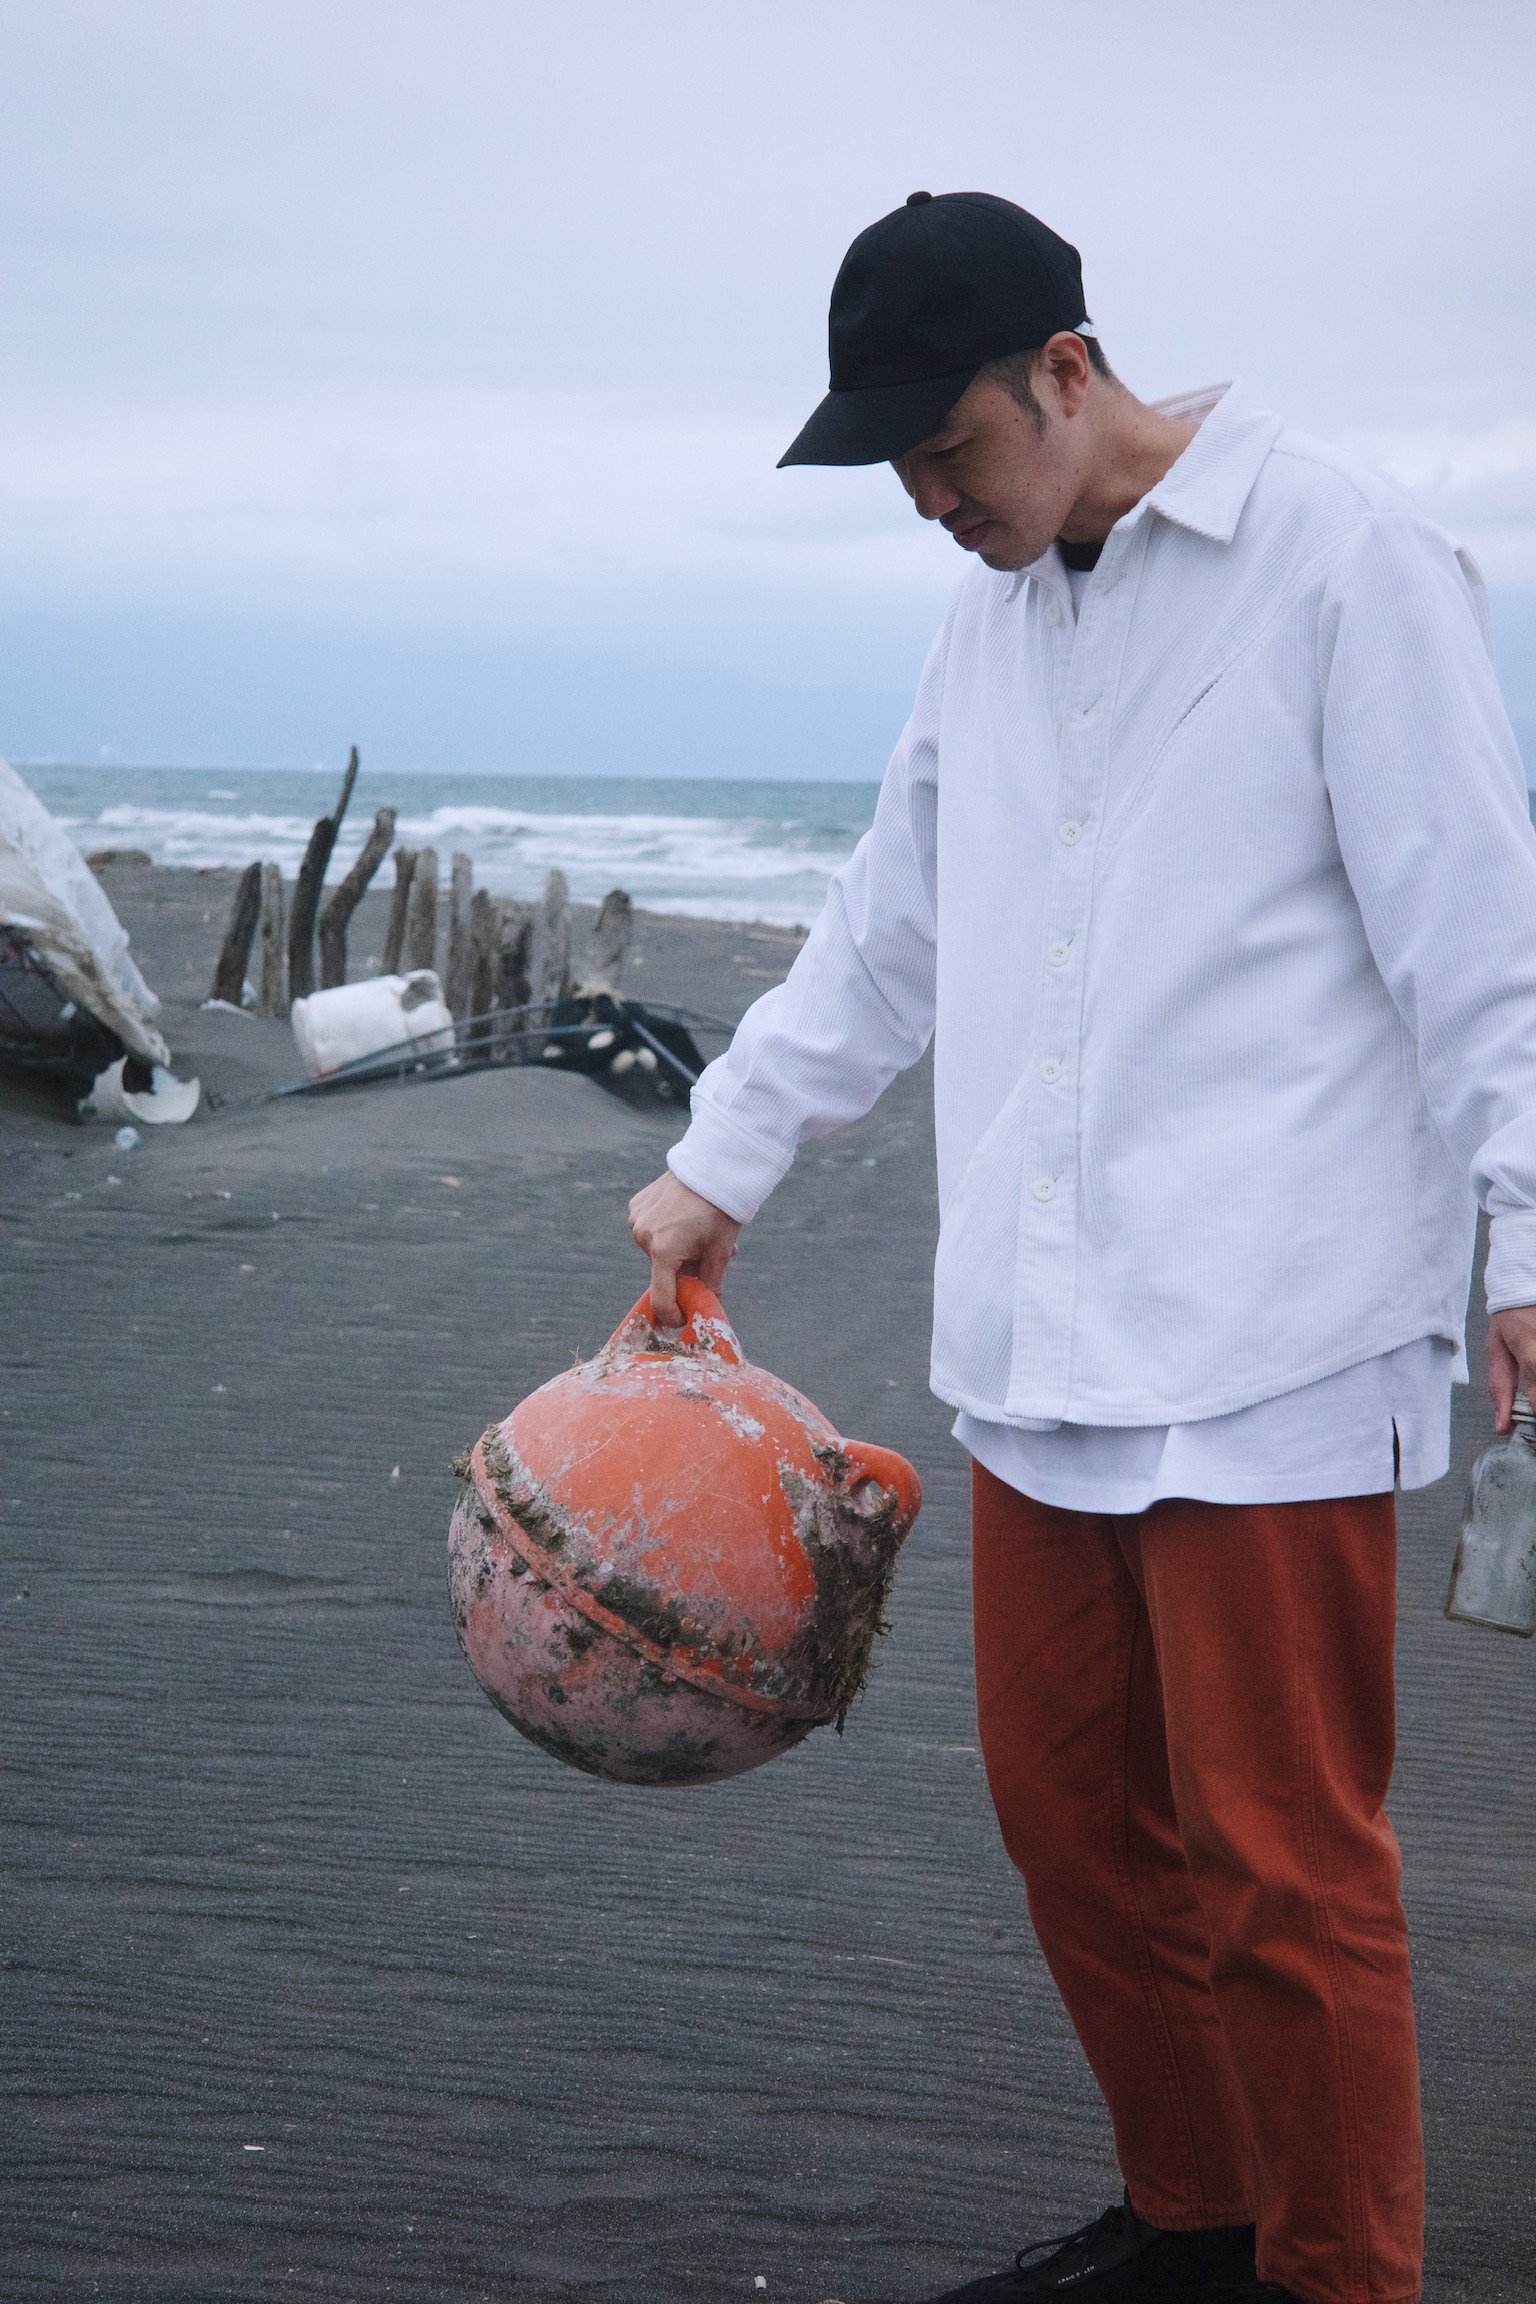 Man wearing a black cap, white shirt, orange pants, black shoes, holding a pinkish orange buoy on a beach with ocean in the background.